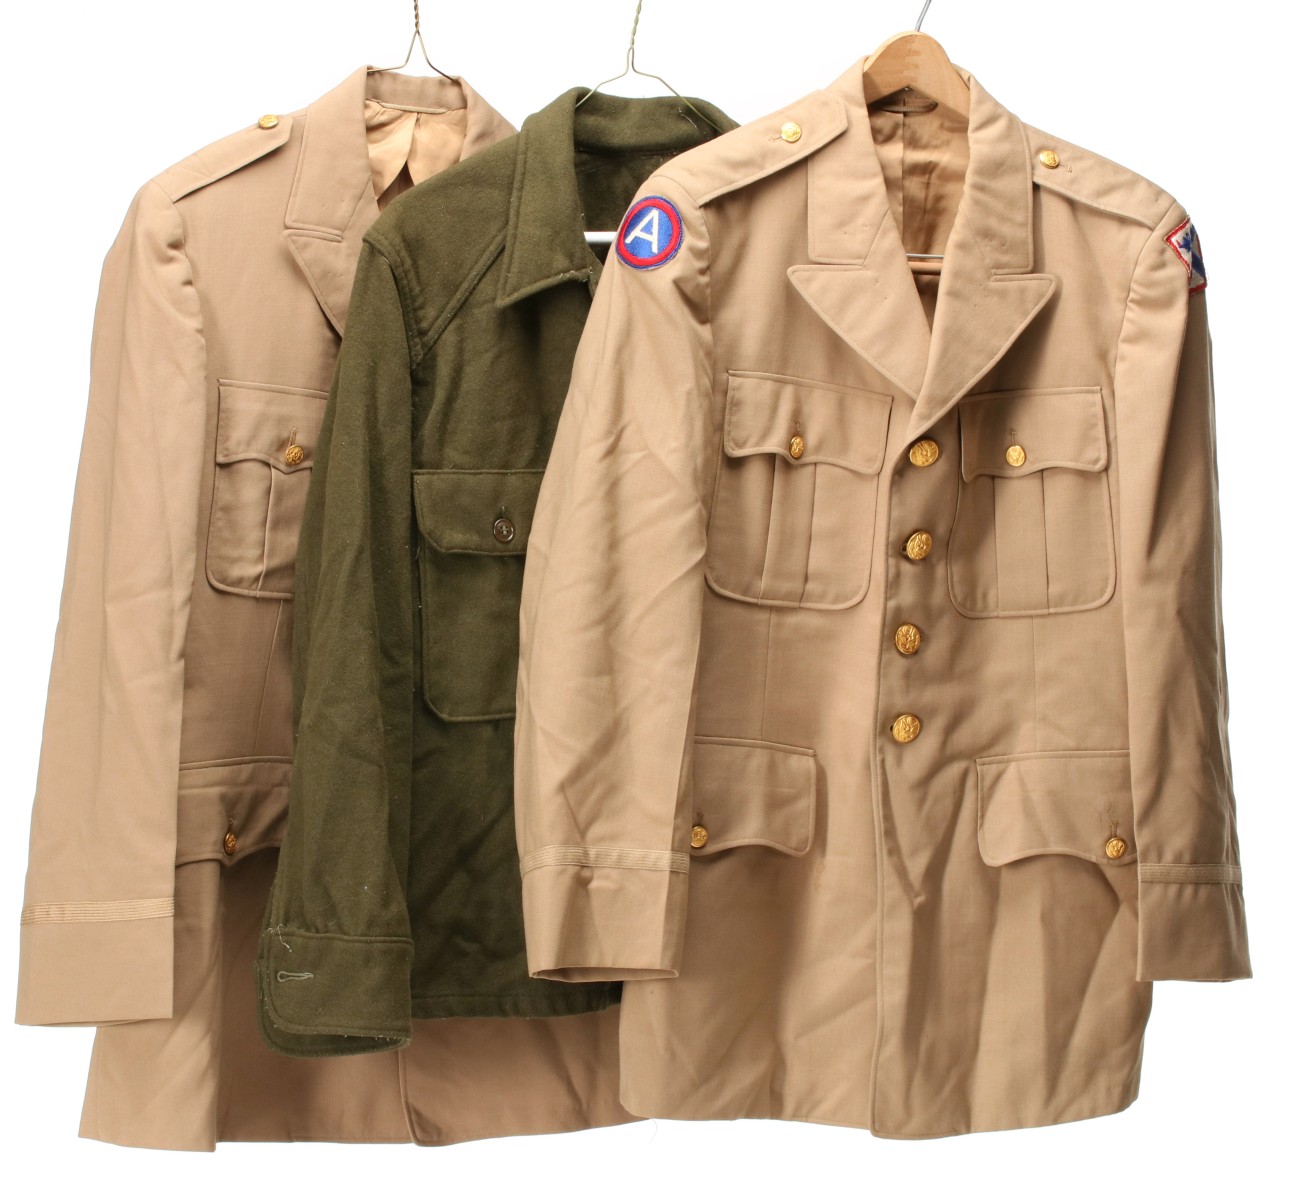 ARMY, NAVY, AAF, USMC AND OTHER WWII UNIFORMS